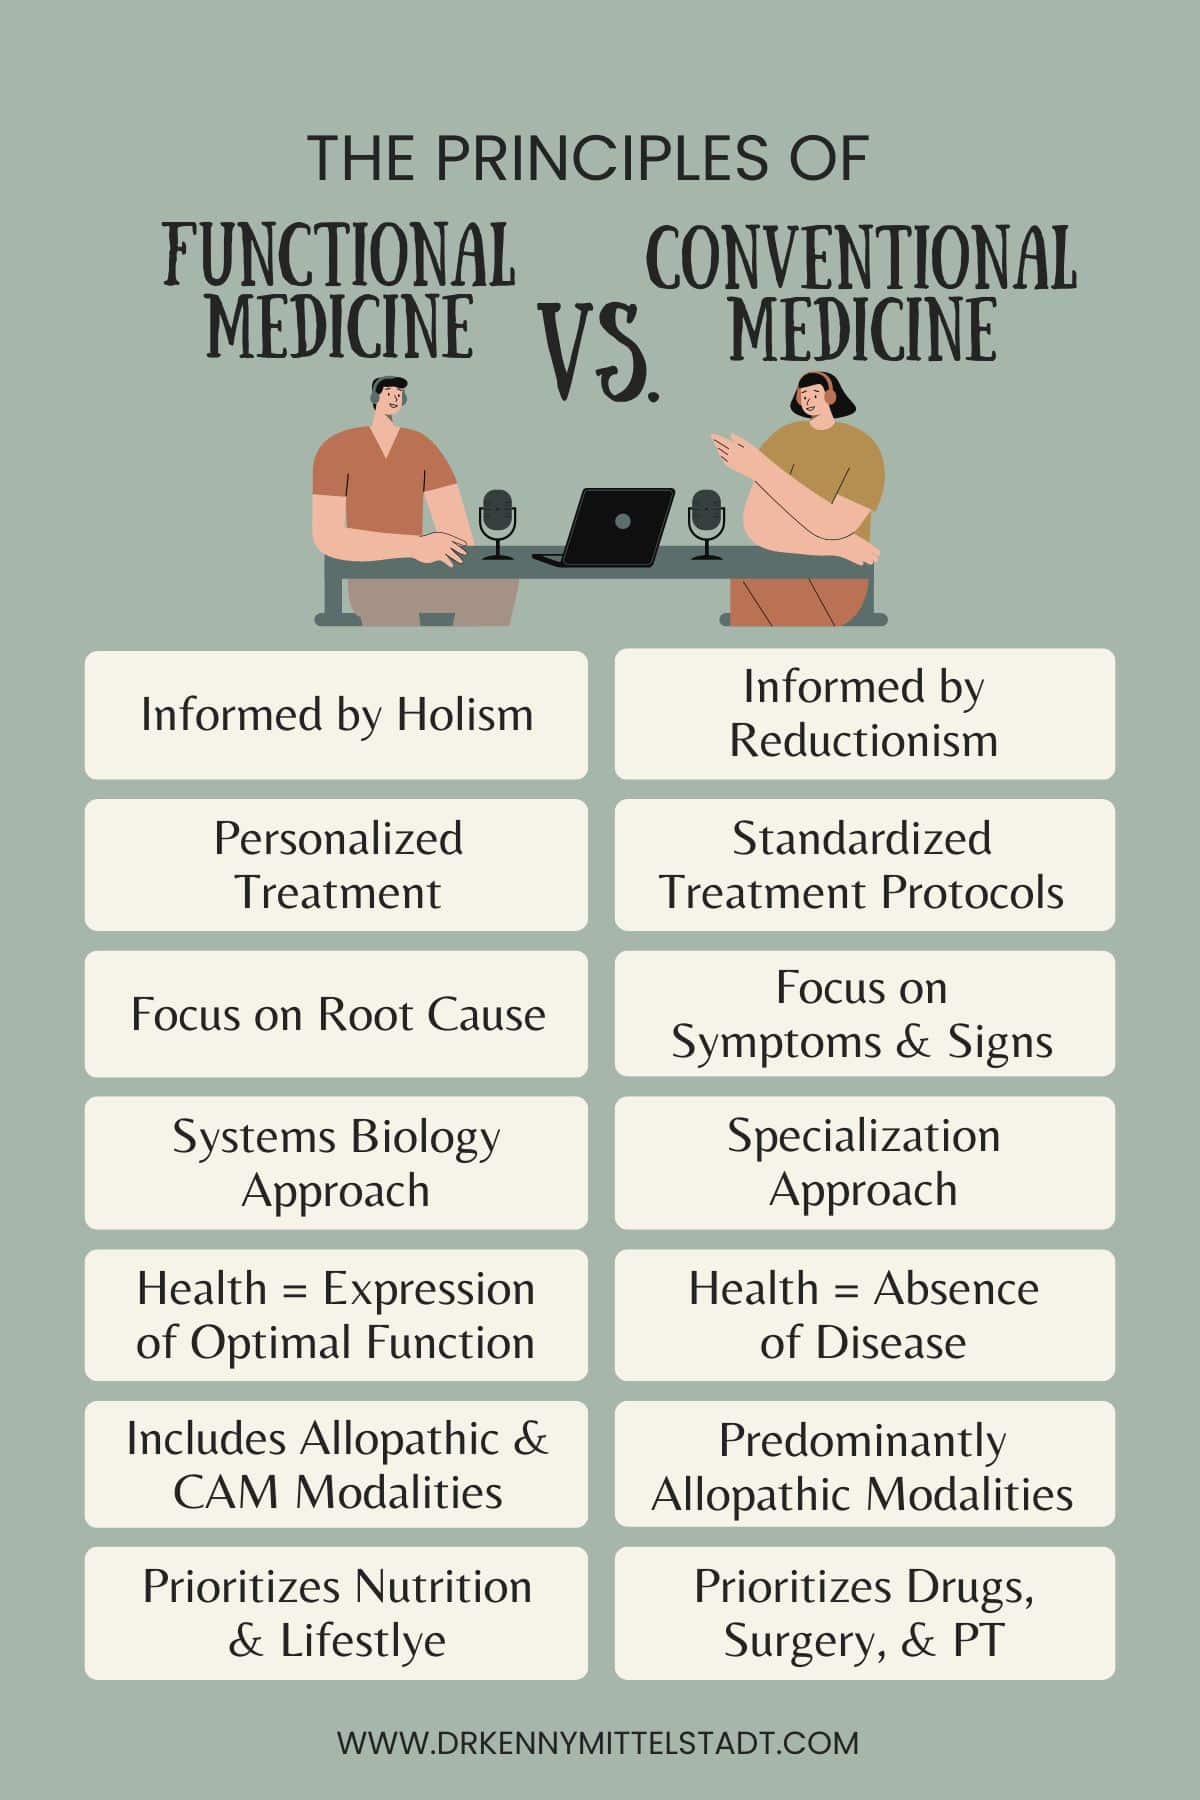 This infographic briefly lays out 7 principles that underly both functional medicine and conventional medicine that are discussed in detail in the blog post body.